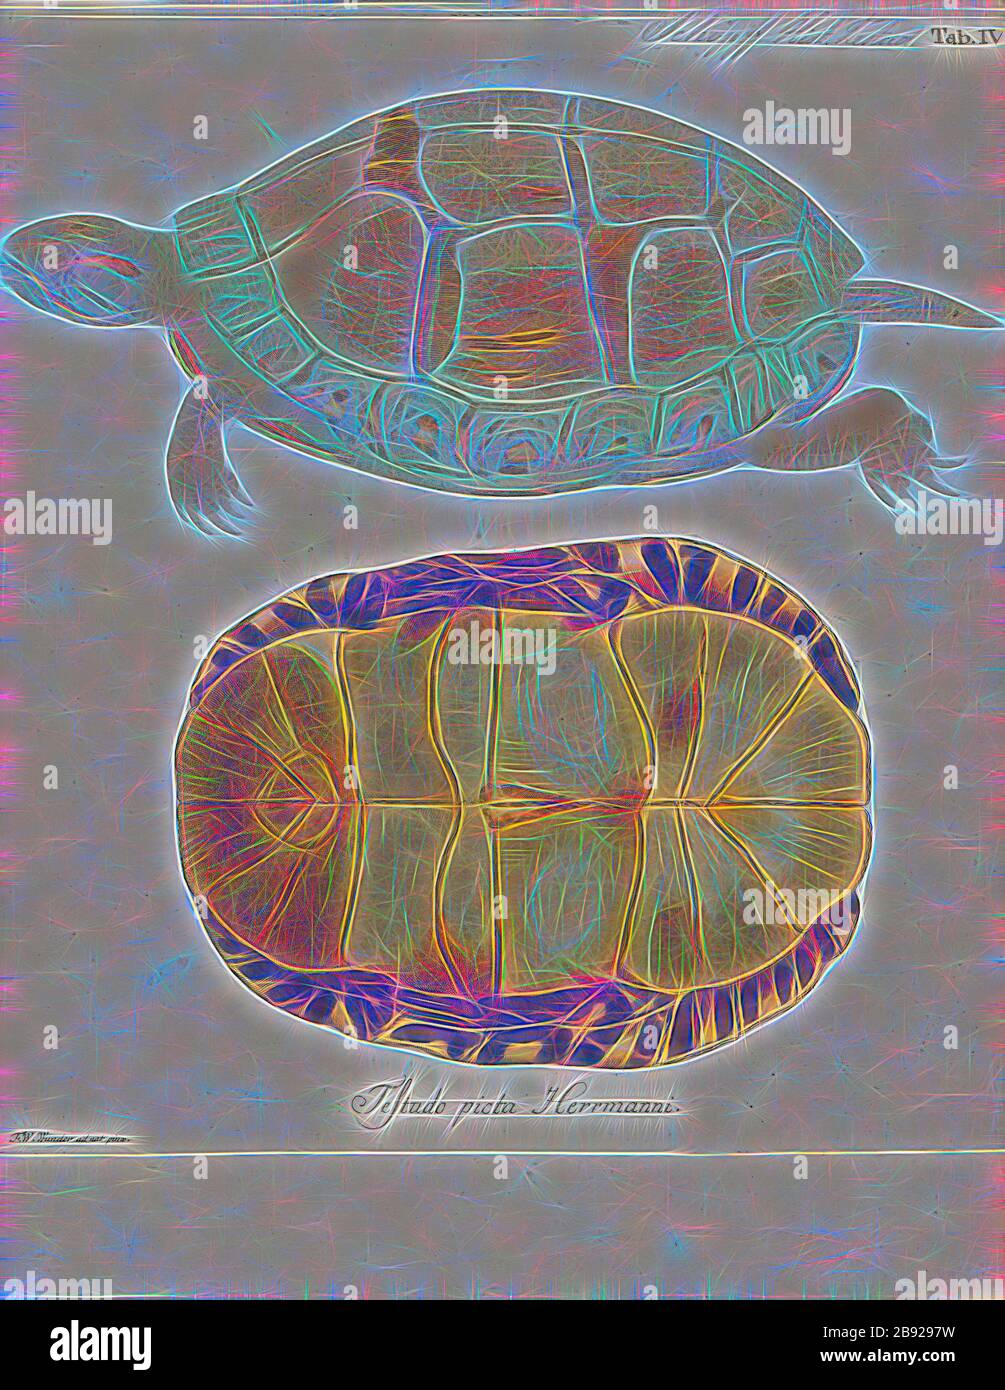 Testudo picta herrmanni, Print, 1700-1880, Reimagined by Gibon, design of warm cheerful glowing of brightness and light rays radiance. Classic art reinvented with a modern twist. Photography inspired by futurism, embracing dynamic energy of modern technology, movement, speed and revolutionize culture. Stock Photo